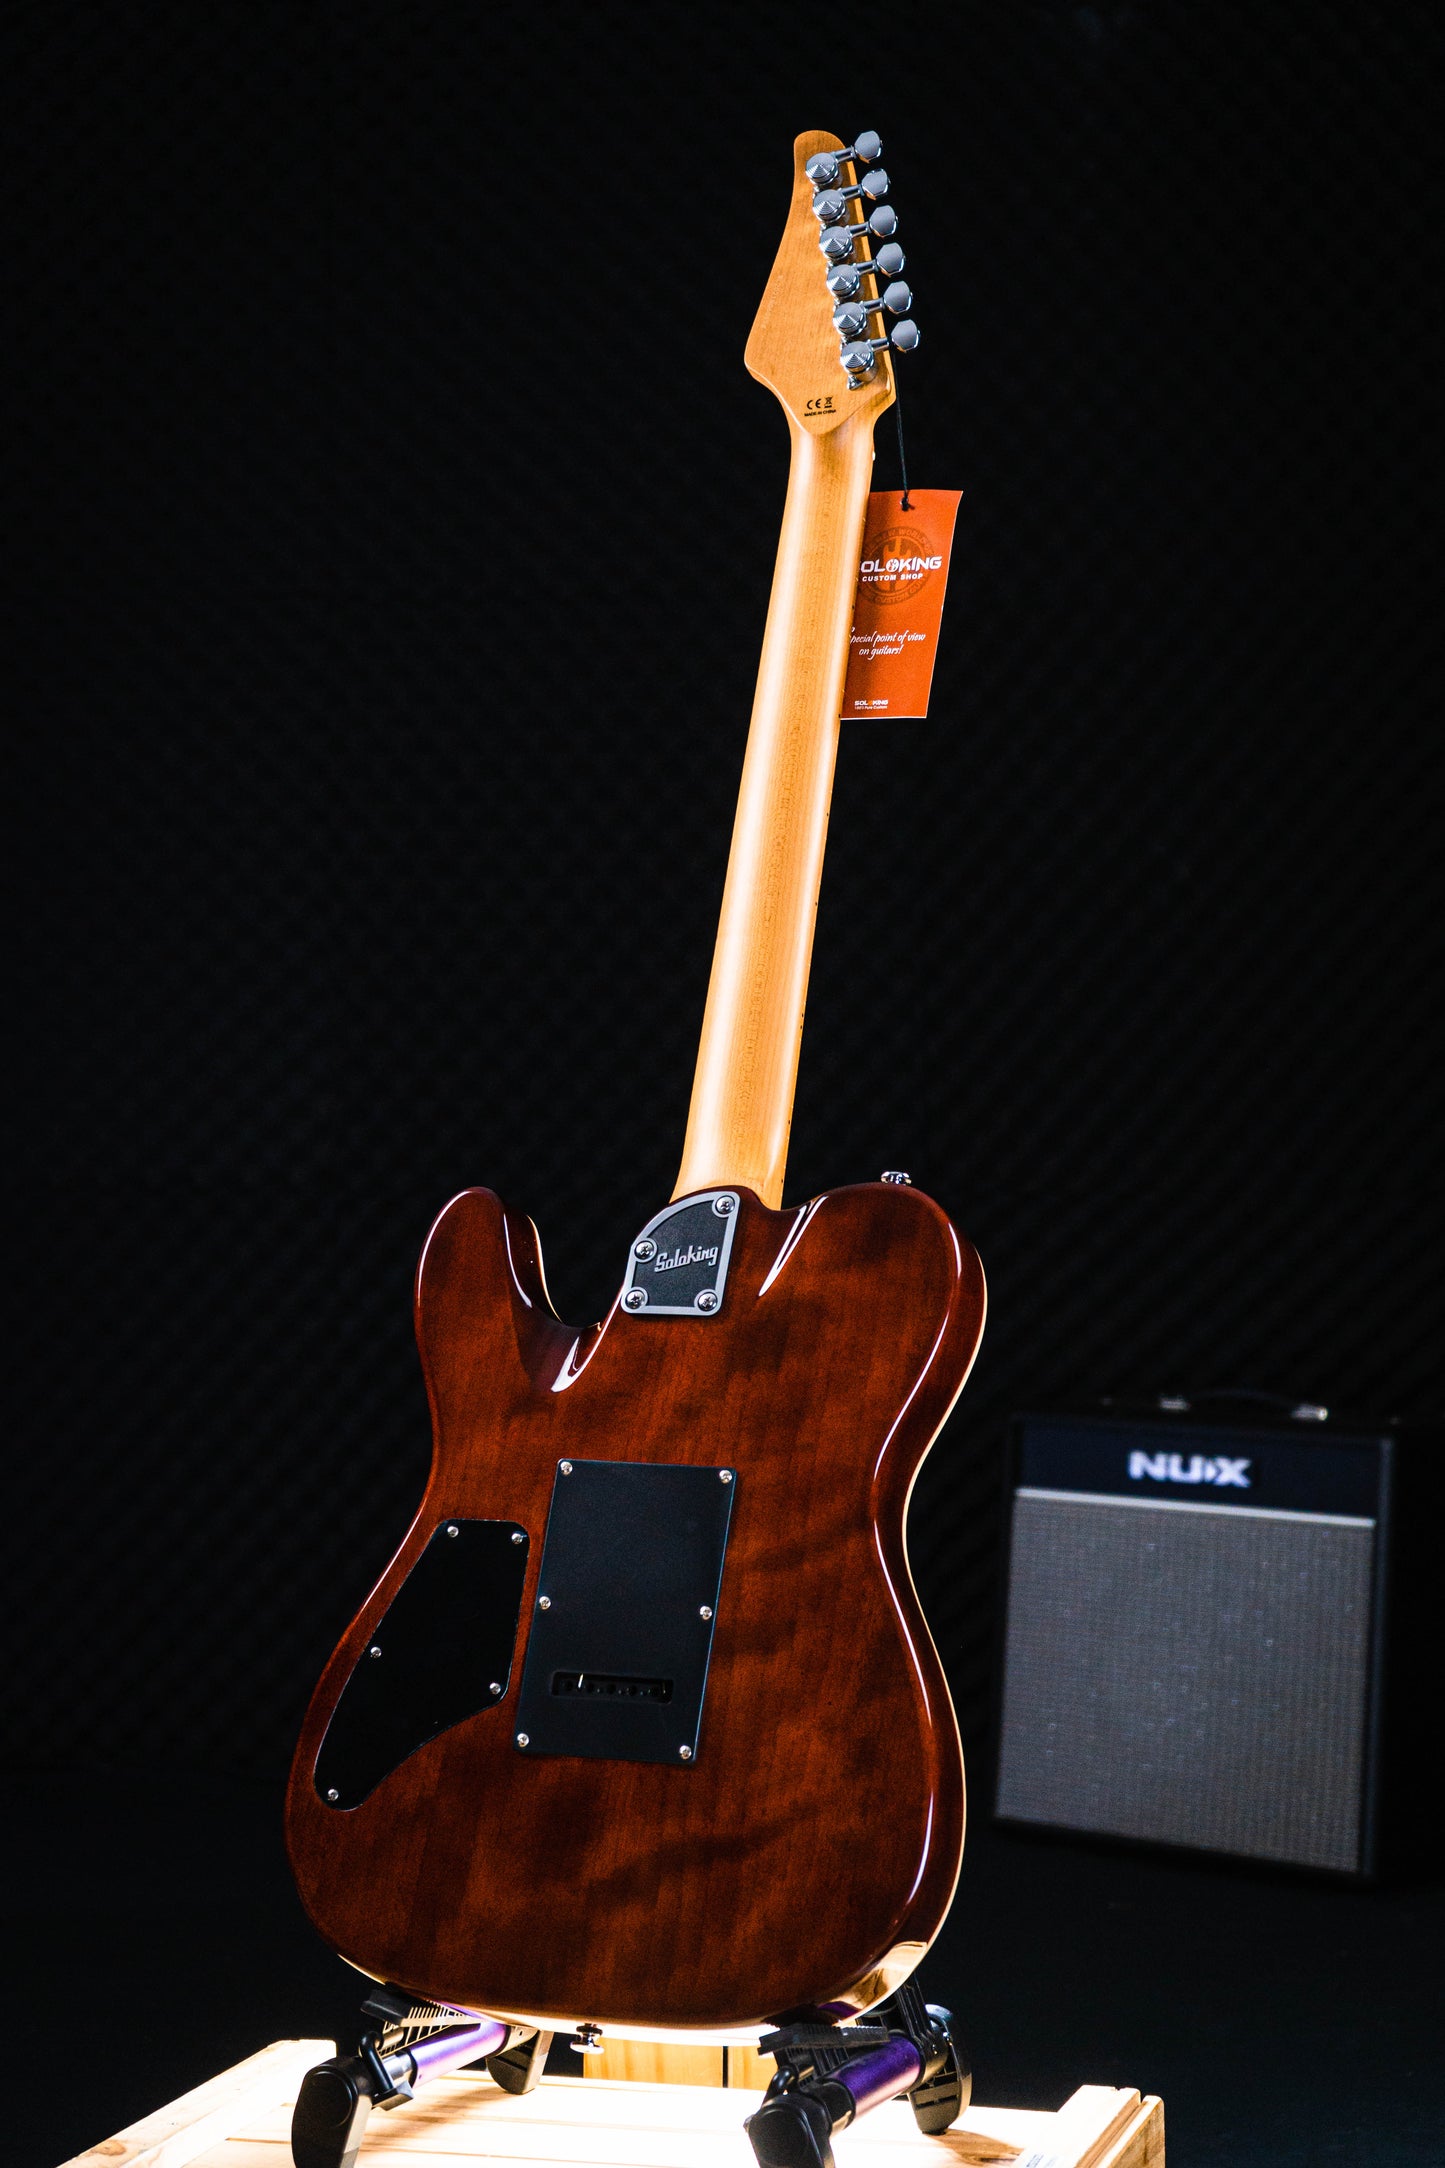 Soloking MT-1 Custom 24 Quilt in Seethru Black with Roasted Maple neck and FB